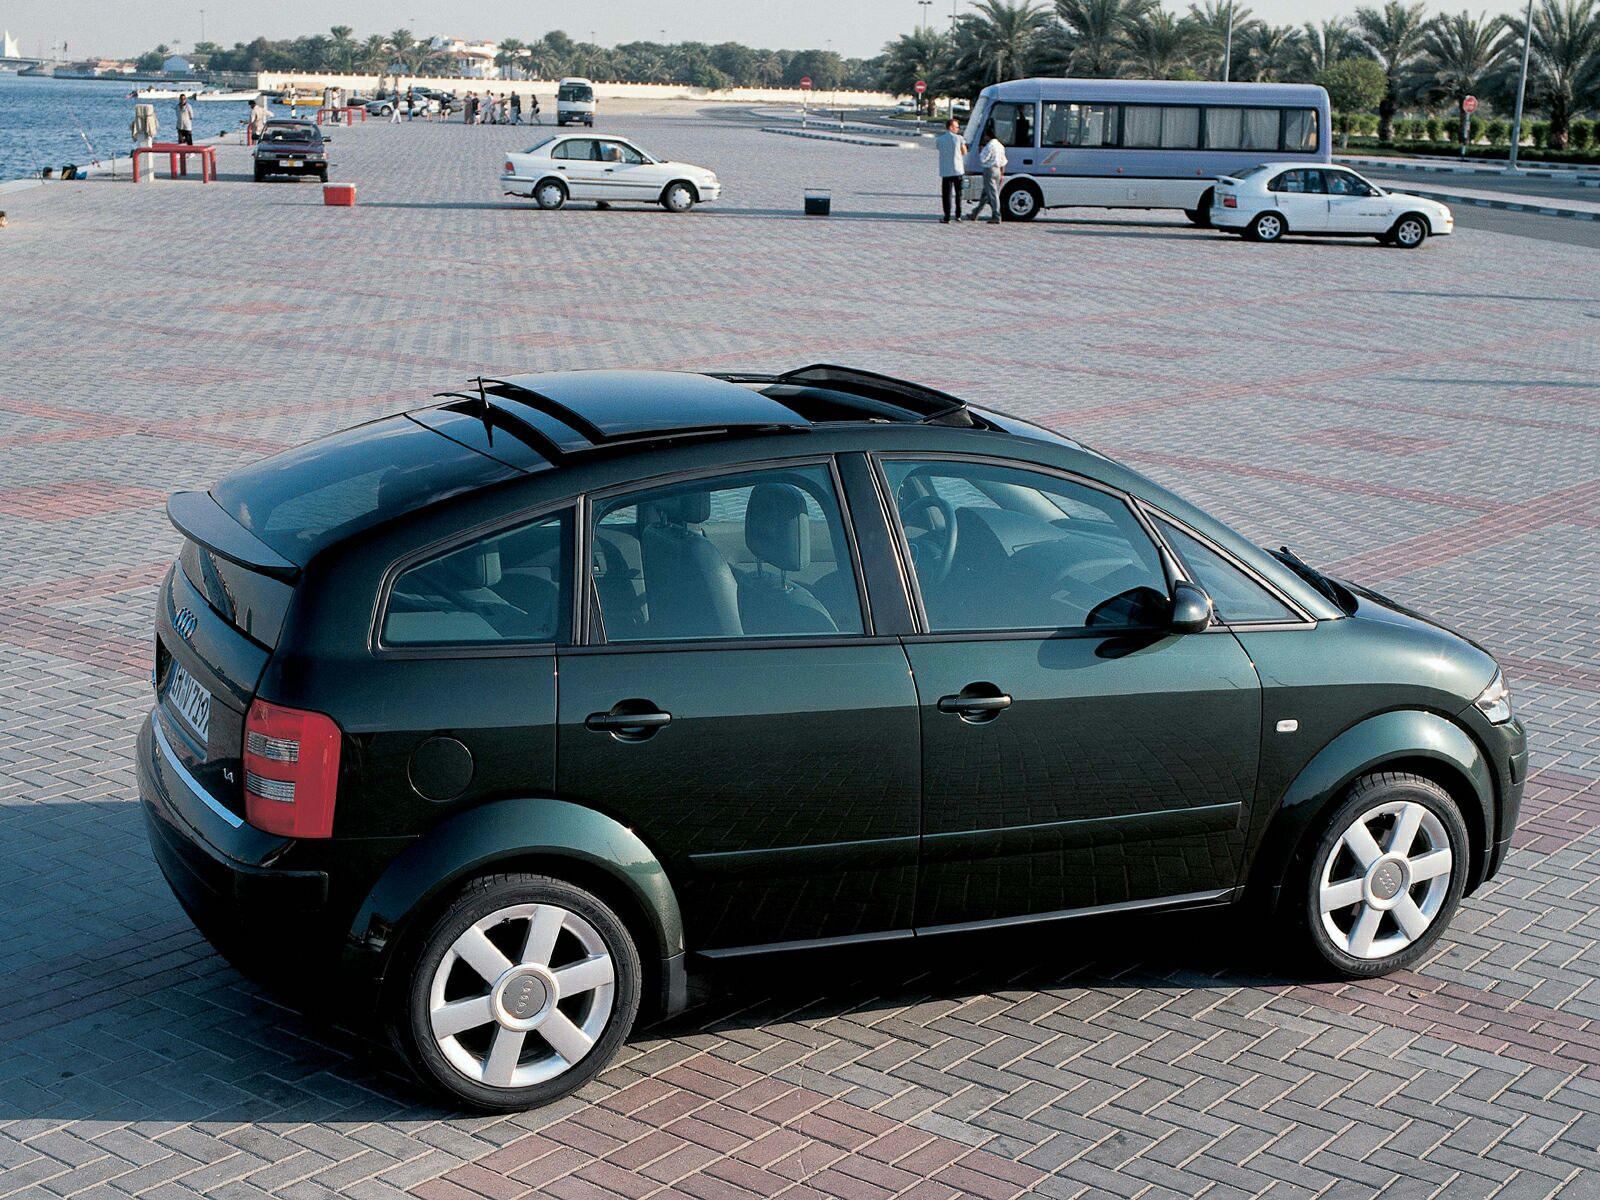 Audi a2 wallpapers